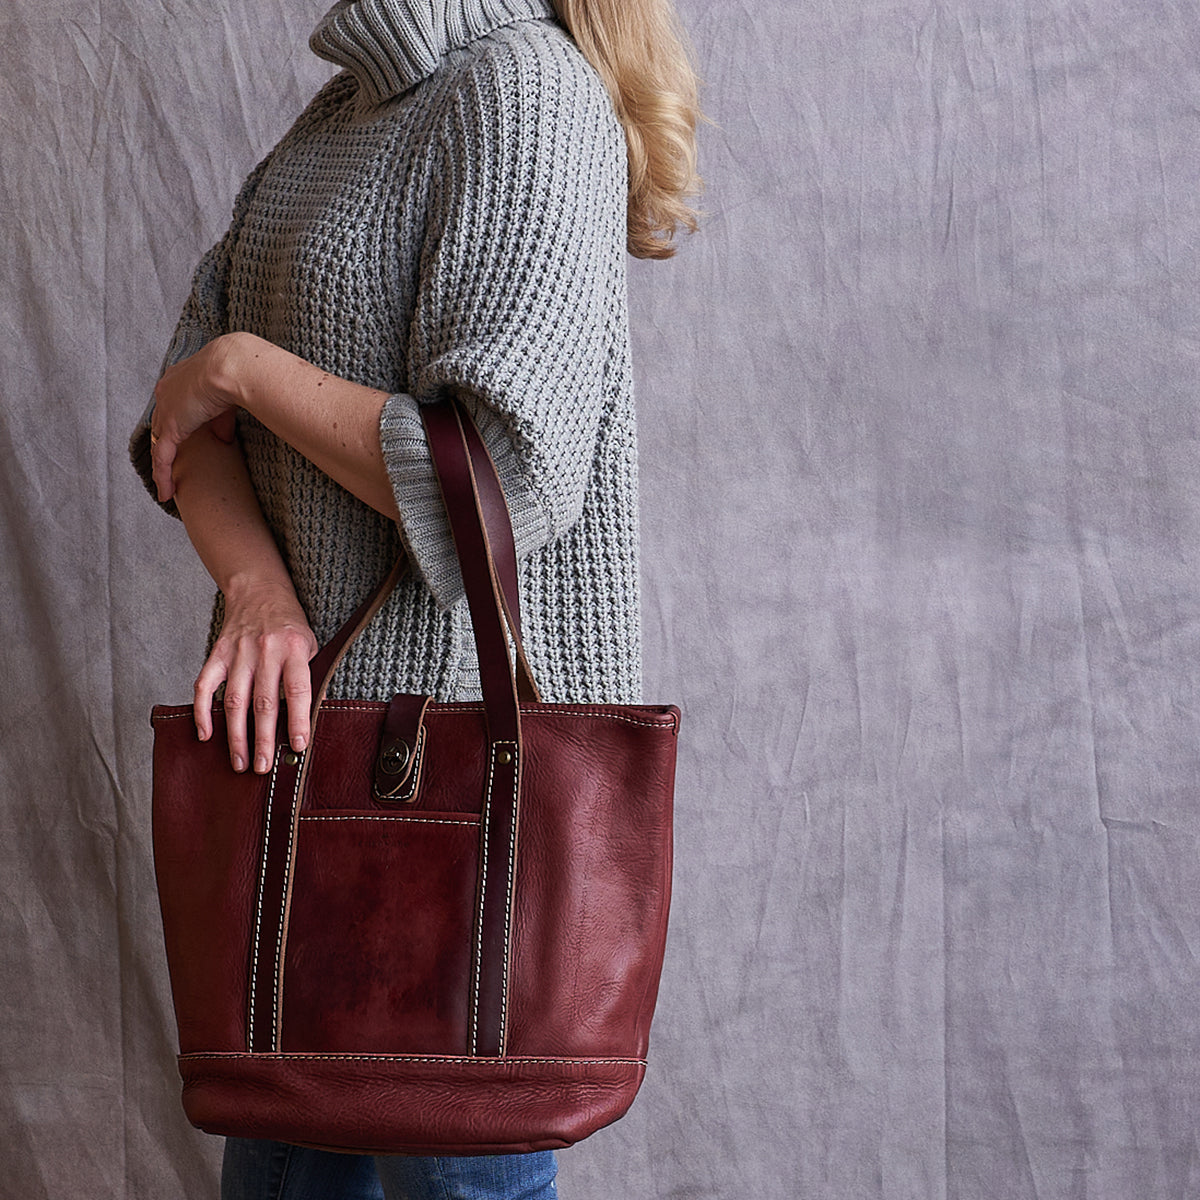 Stone-Washed Tote No.532 | LE Russet